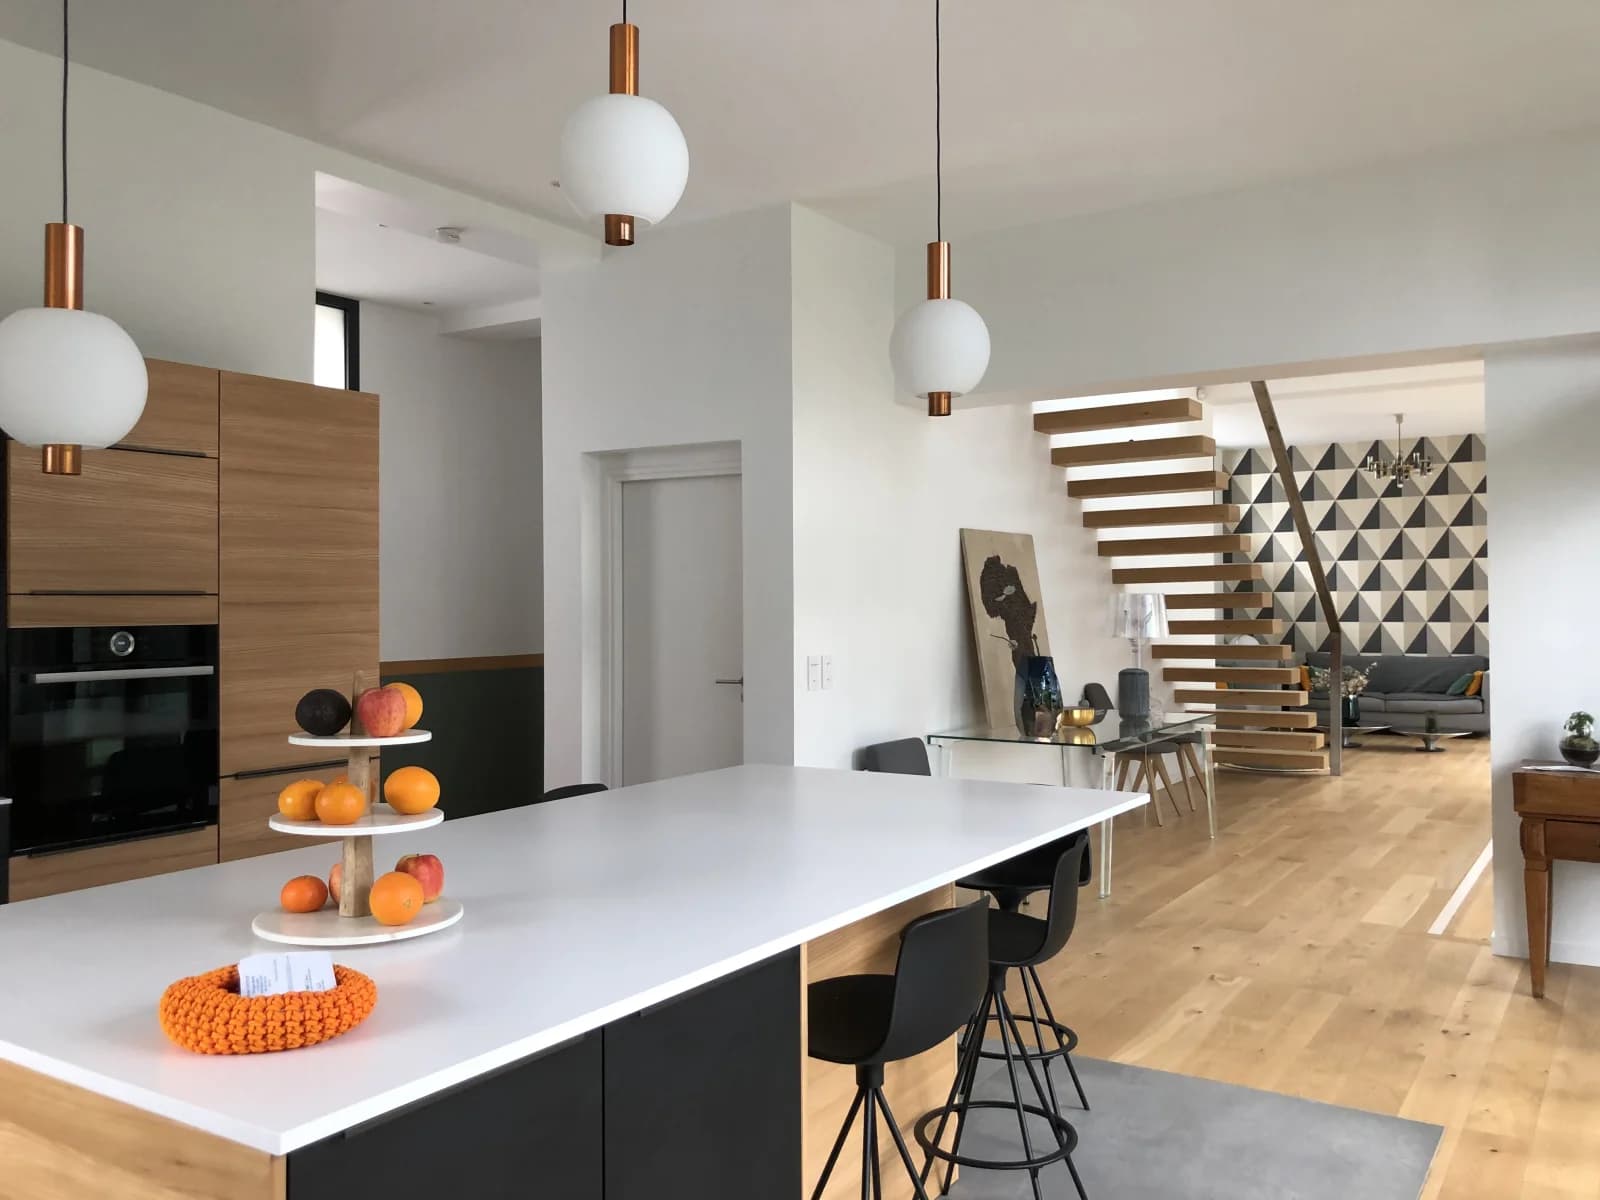 Kitchen in Architect-designed house bathed in light - 0